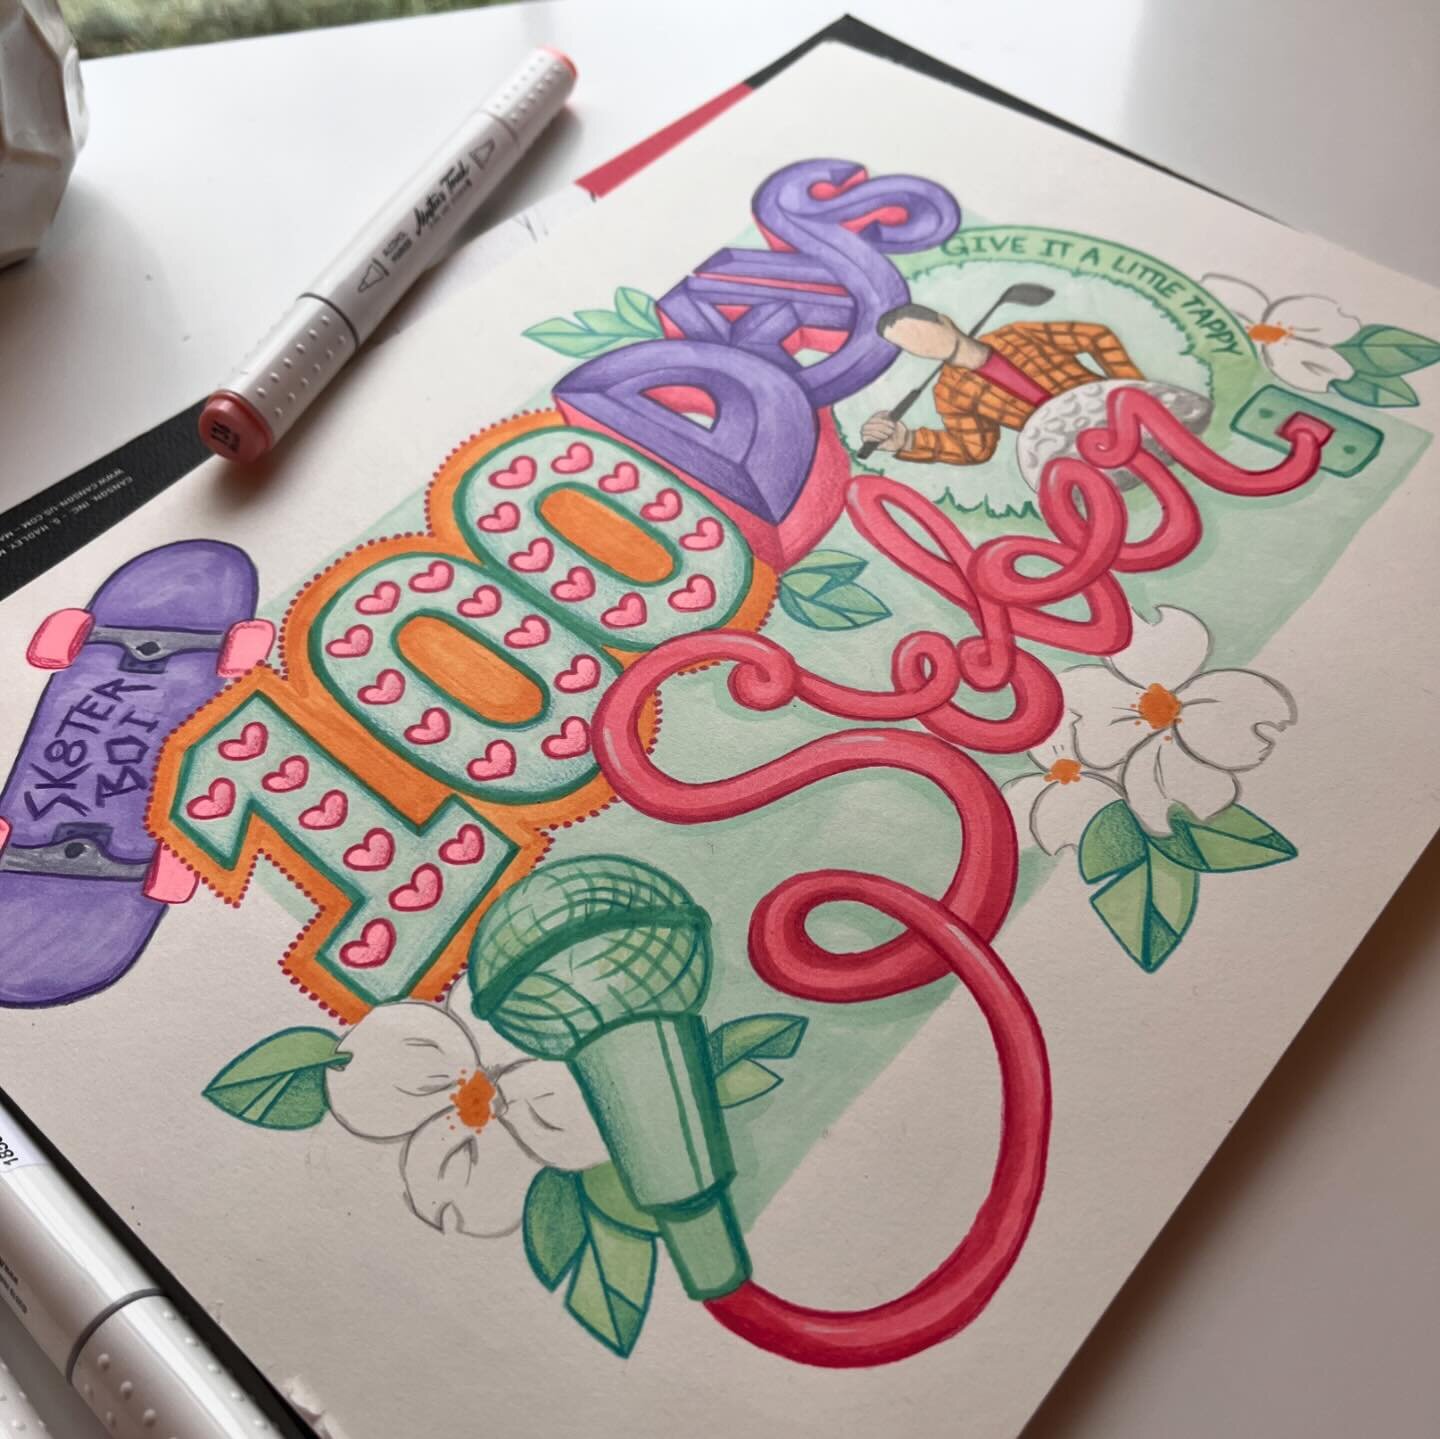 Hand-drawn typography work from this past week. Commissioned gift to celebrate a special milestone of sobriety. 🙌🤩

#typography #handdrawntypography #soberisbetter #artistsoninstagram #artoftheday #arttherapy #markerdrawing #masterstouchfineartstud